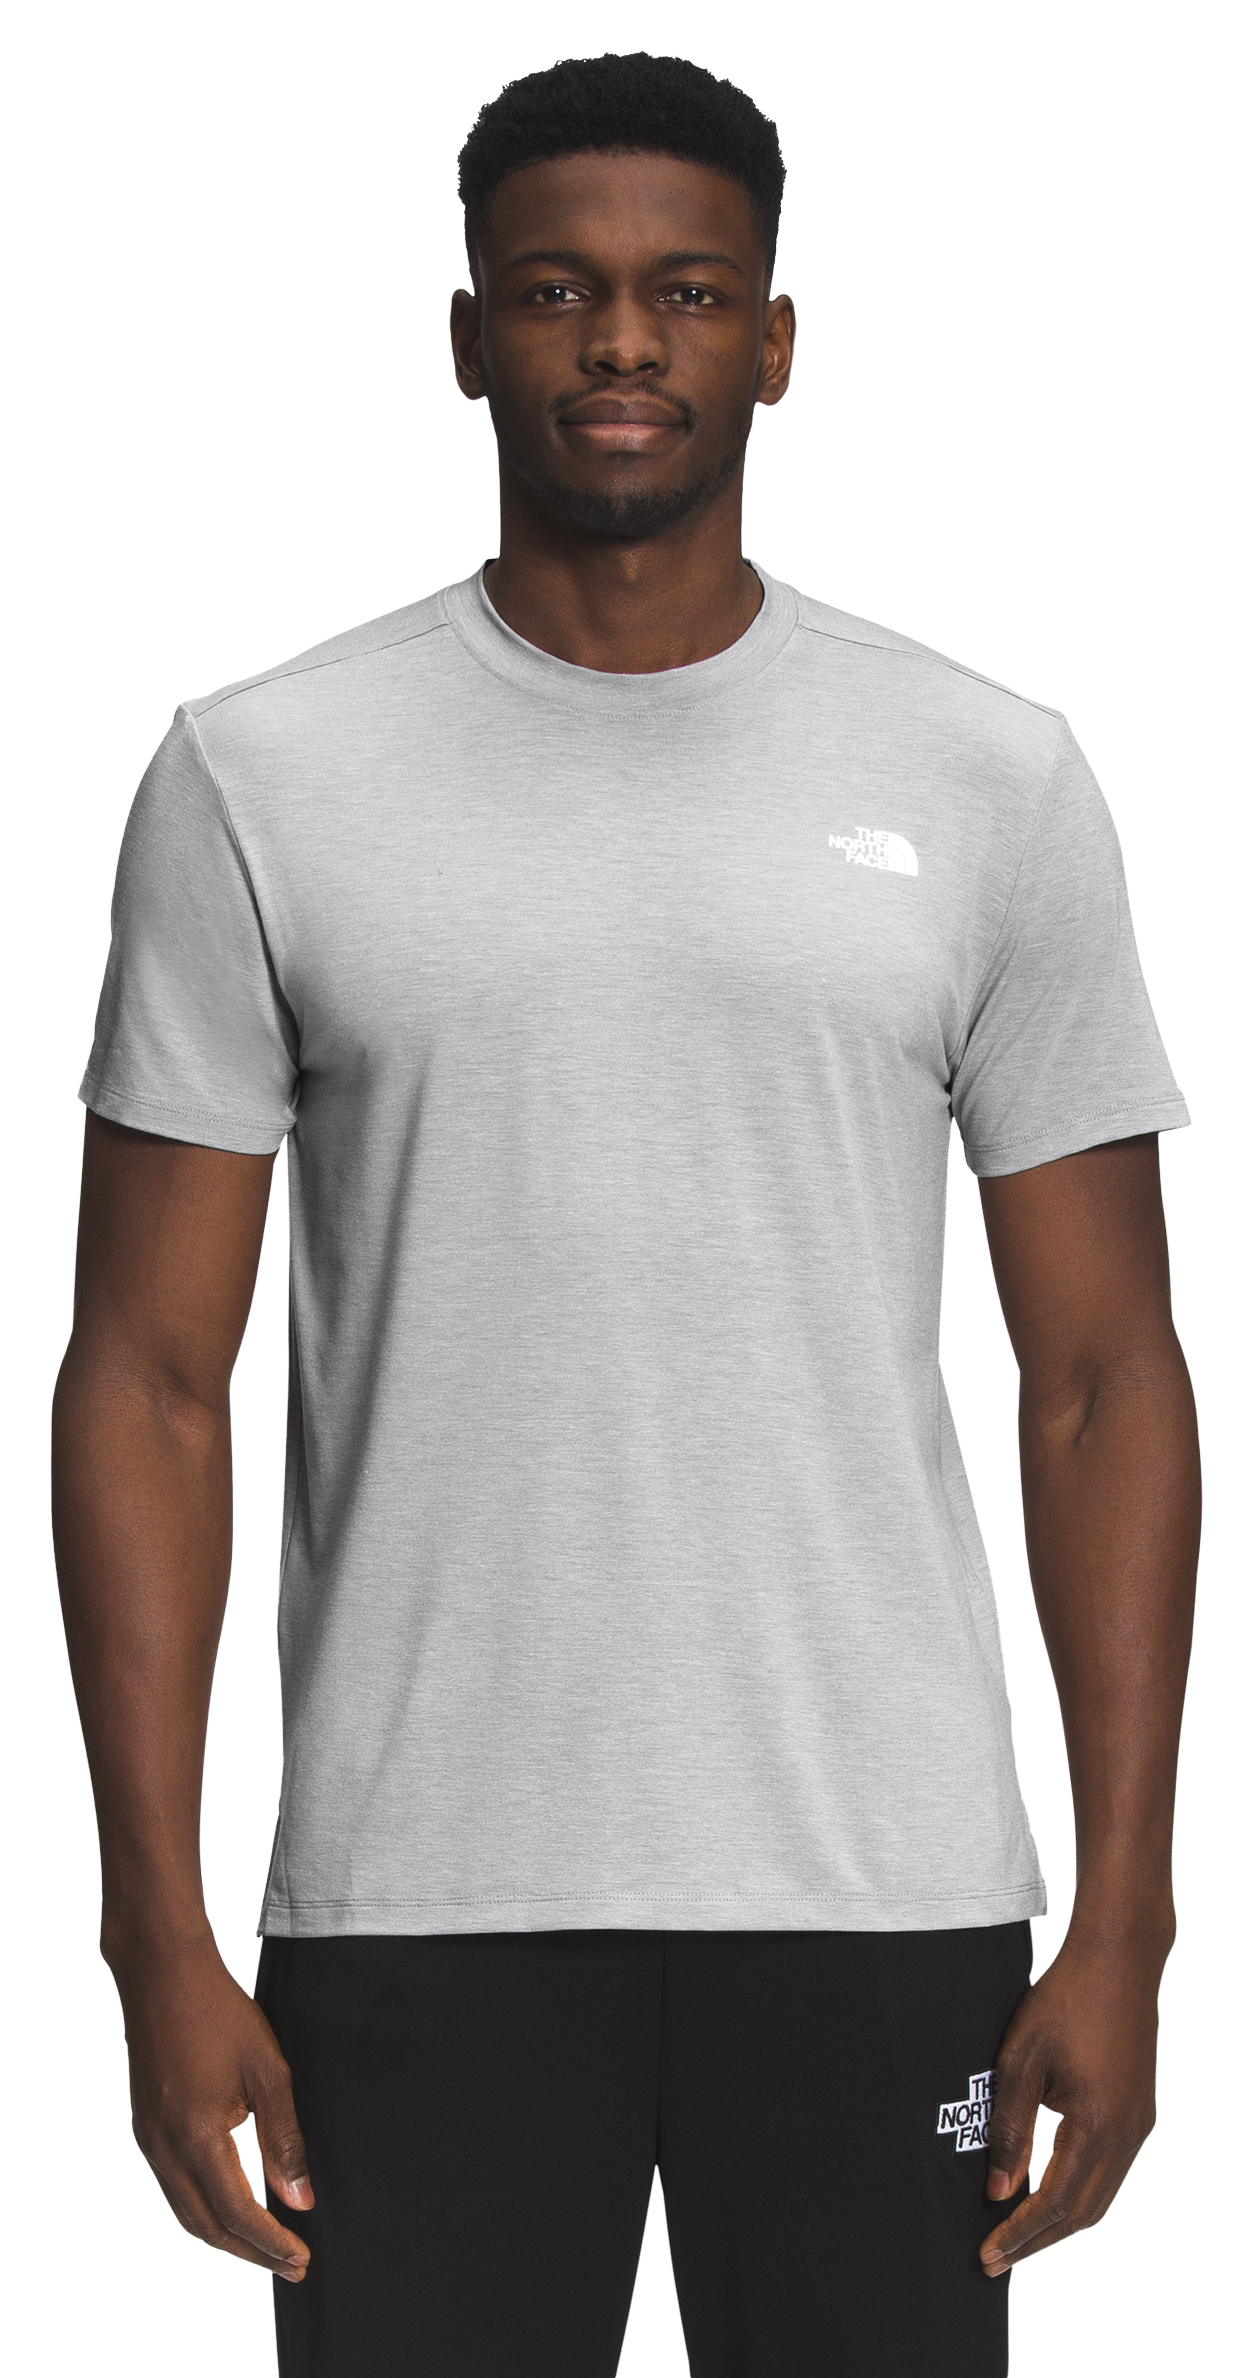 The North Face Photo Box NSE Short-Sleeve T-Shirt for Men